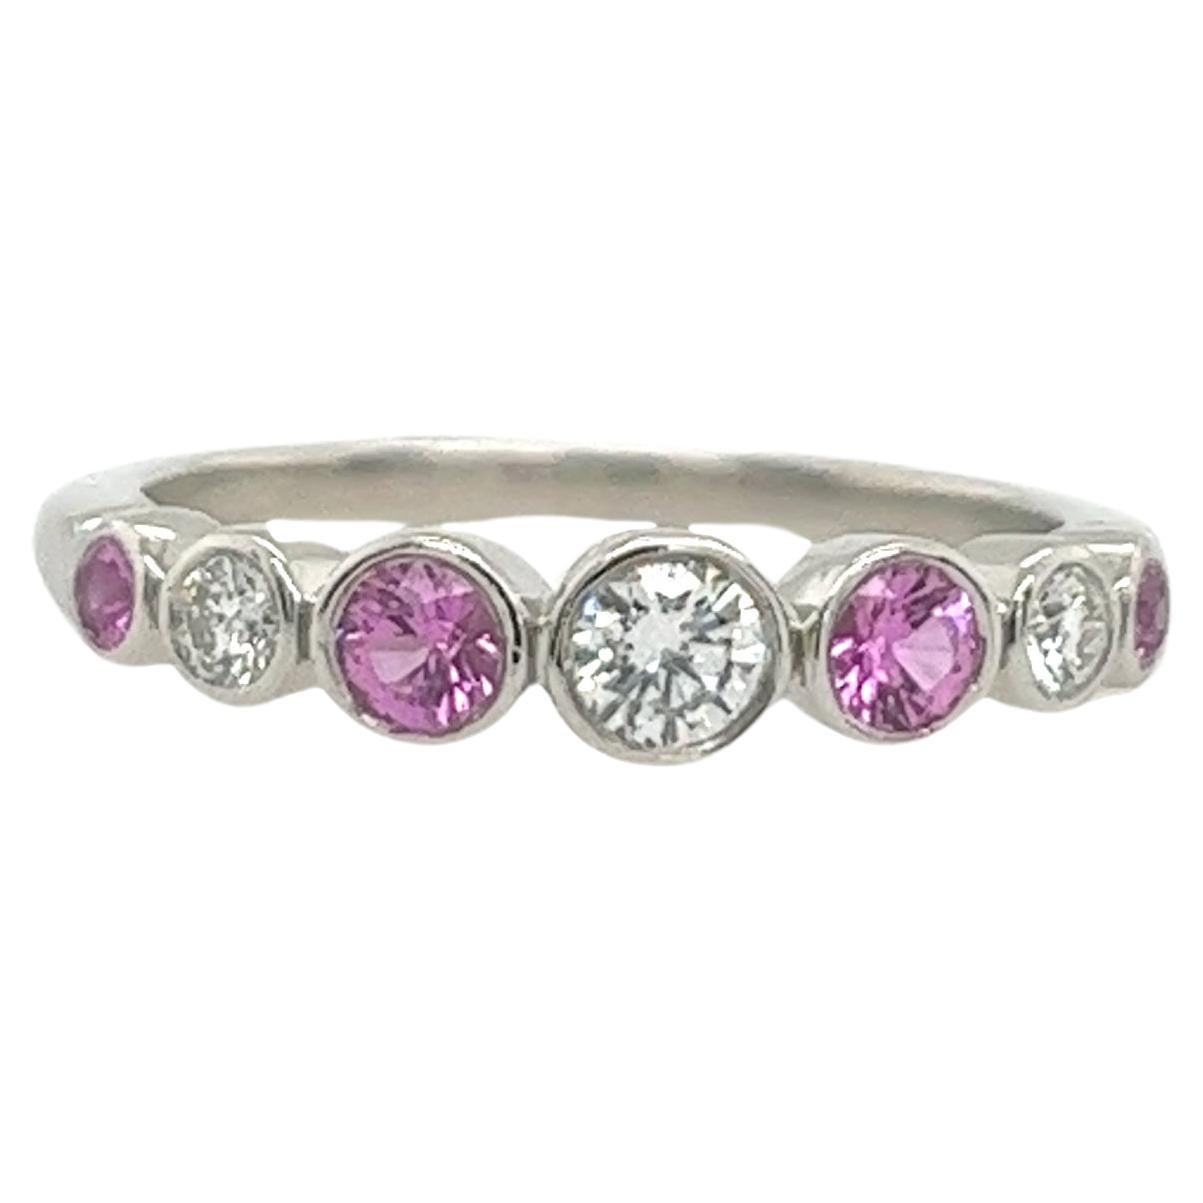 Tiffany & Co. Jazz ring set with 3 Diamonds &4 Pink Sapphires in a graduated set For Sale